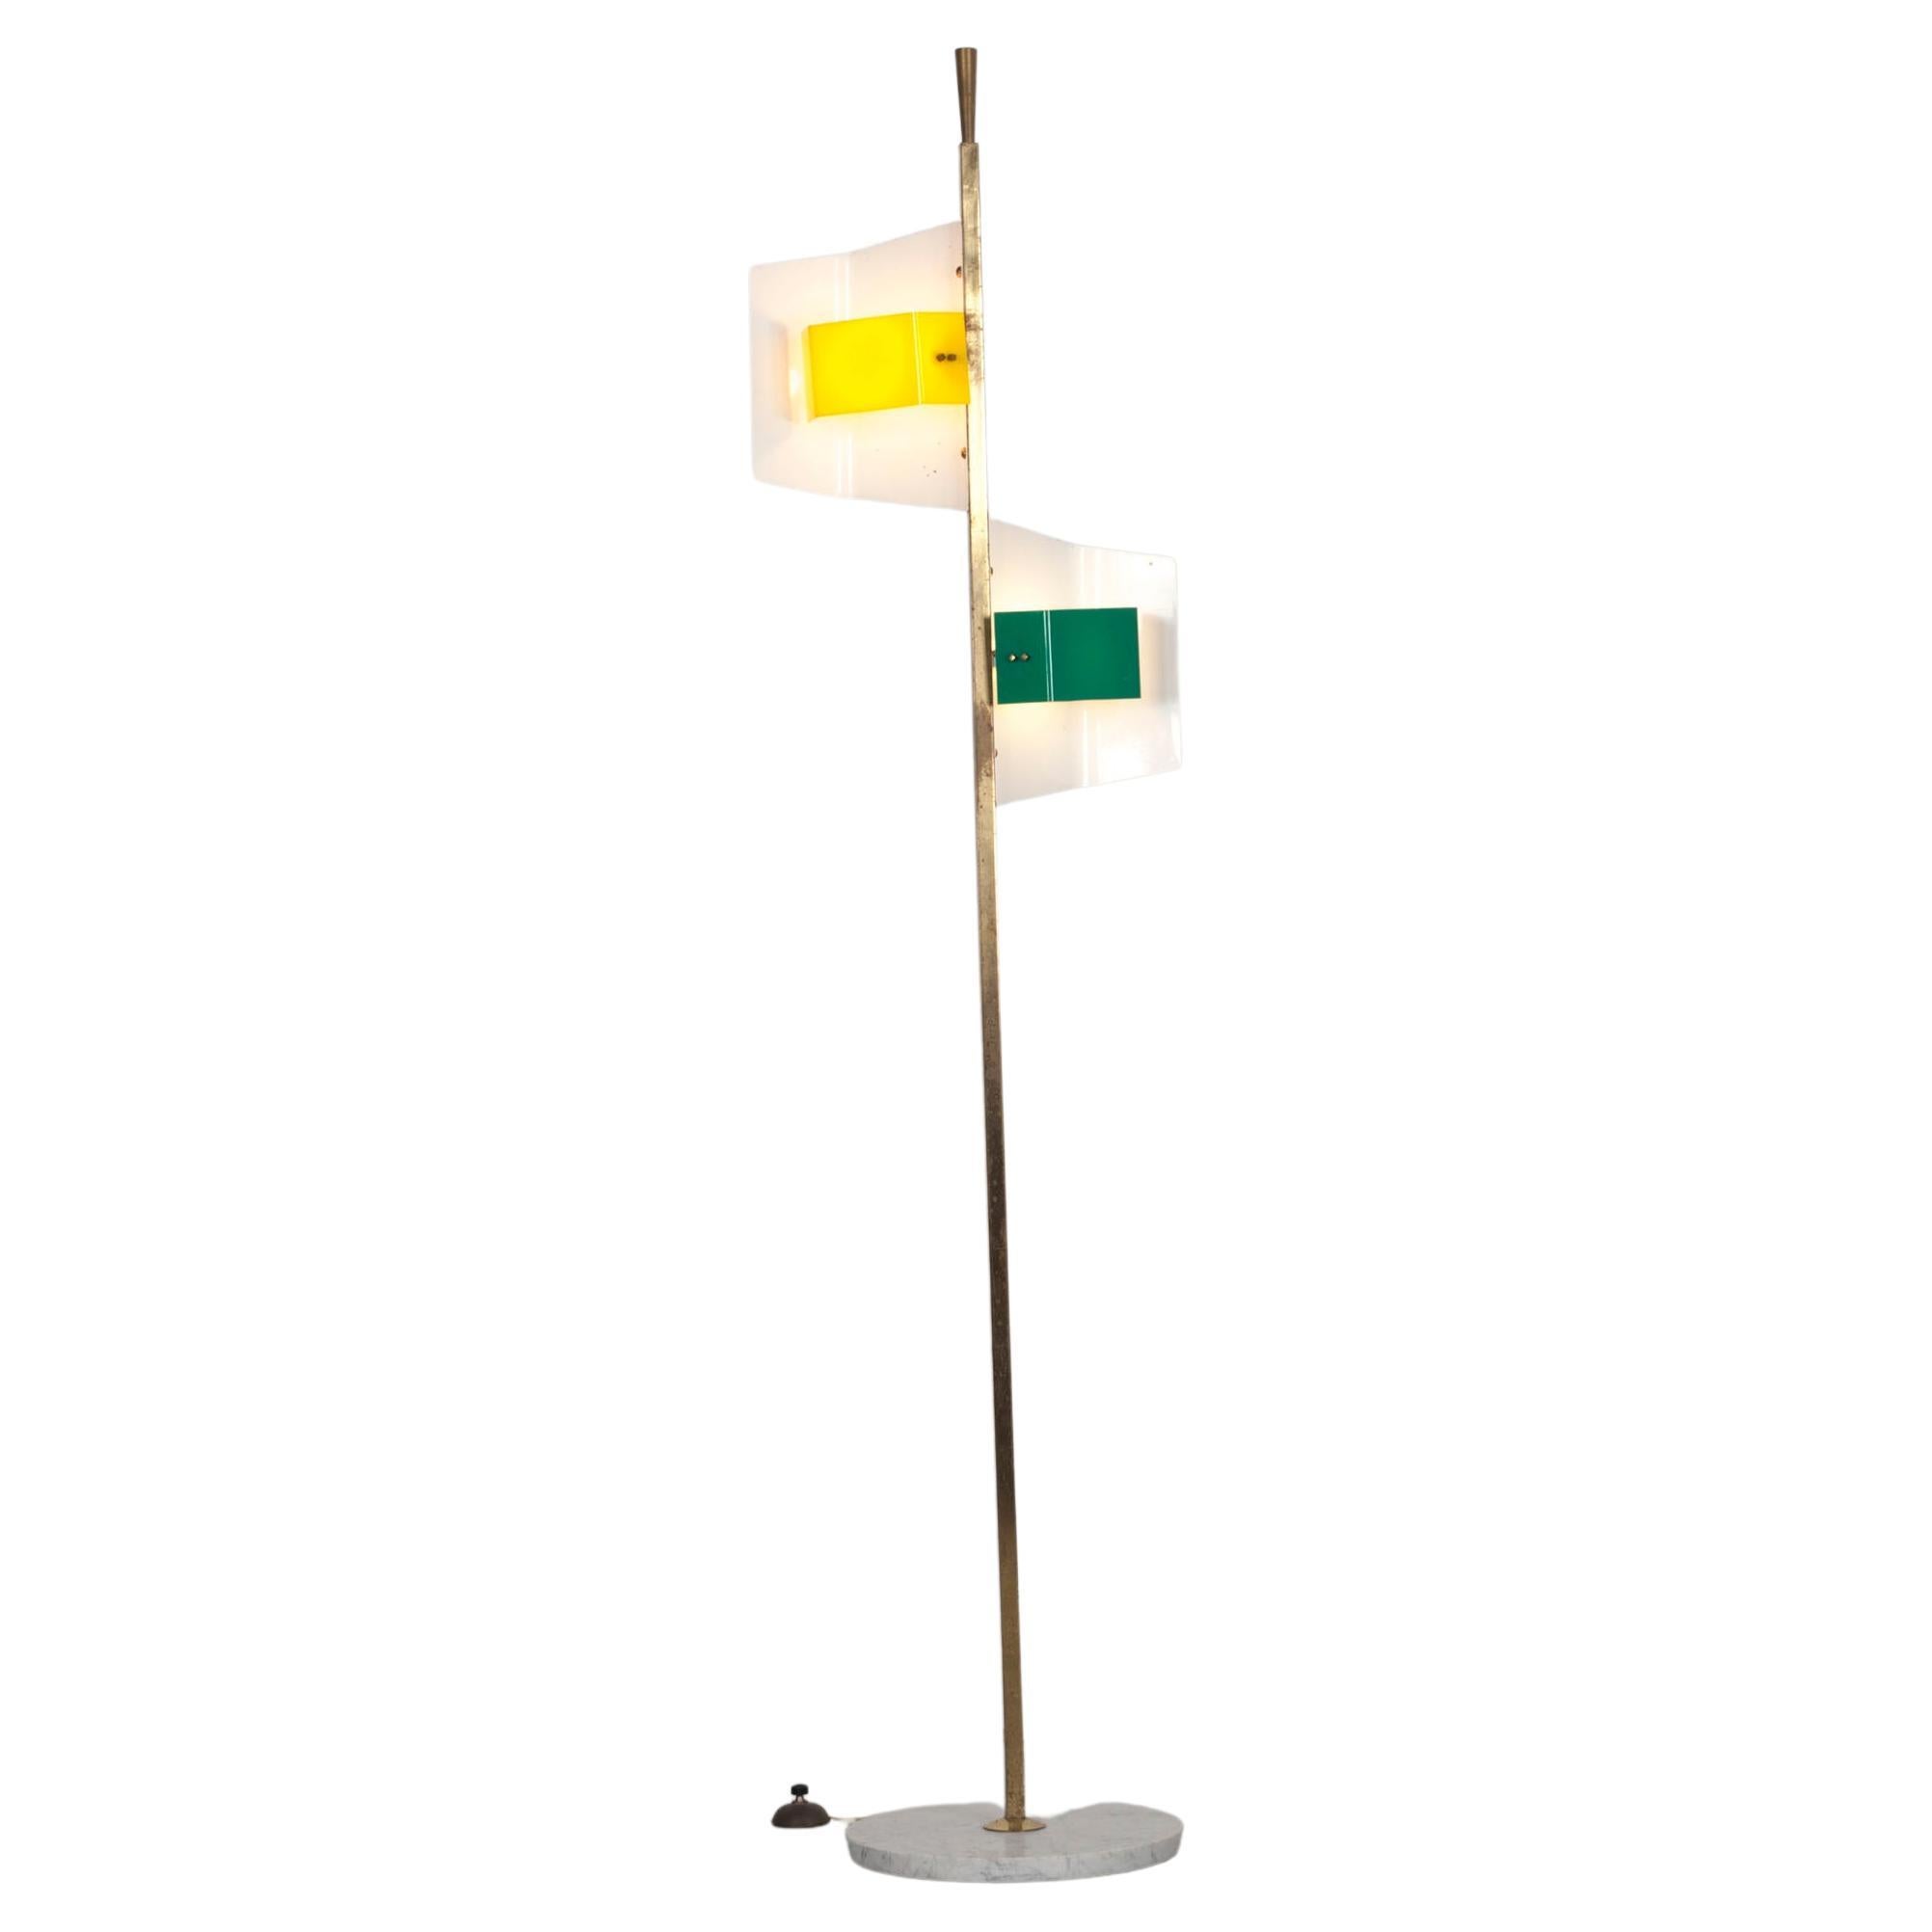  Italian Stilnovo floor lamp with yellow and green Perspex shade from the 50s. For Sale